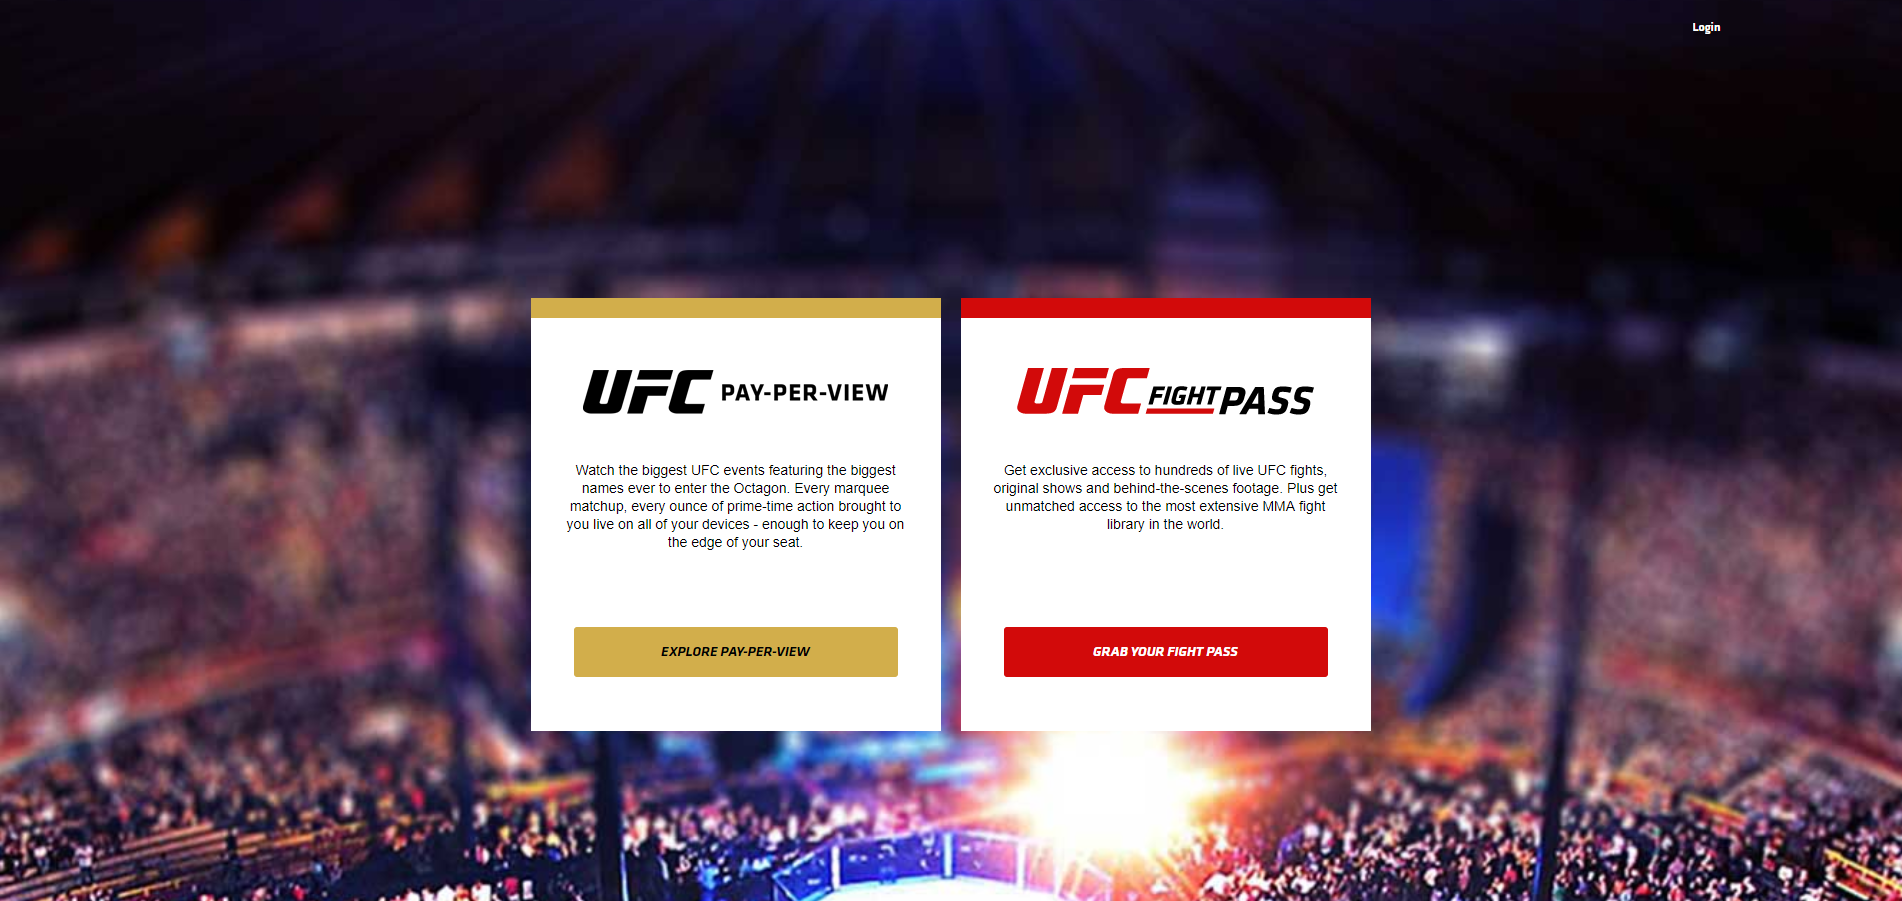 There is No Free UFC, But You Can Get 50% Off